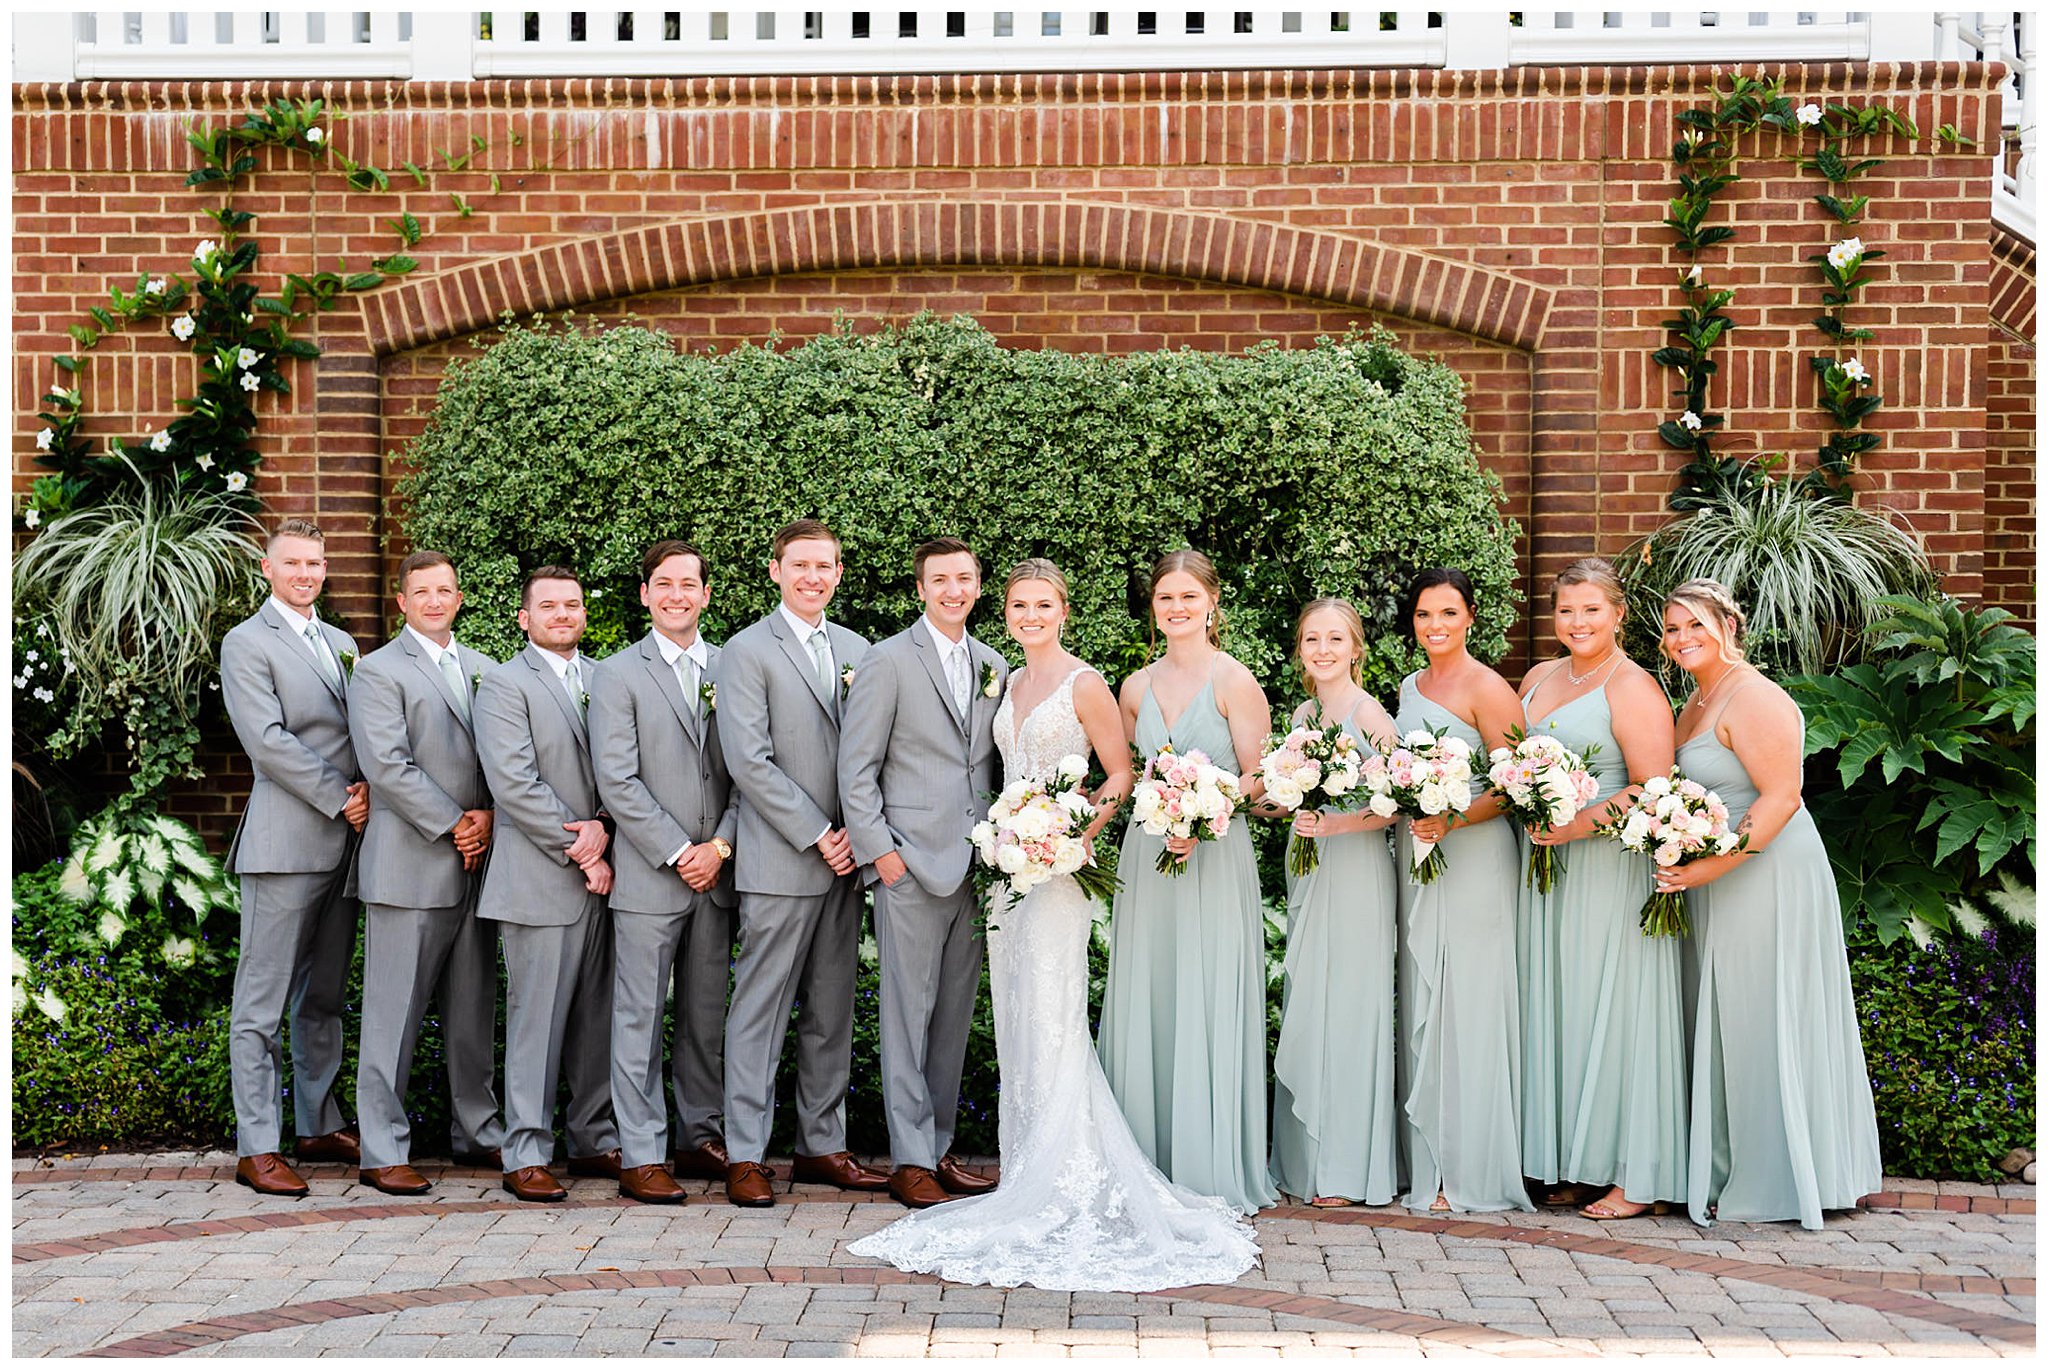 newlyweds stand with wedding party in grey and sage green

The Clubhouse At Baywood Wedding